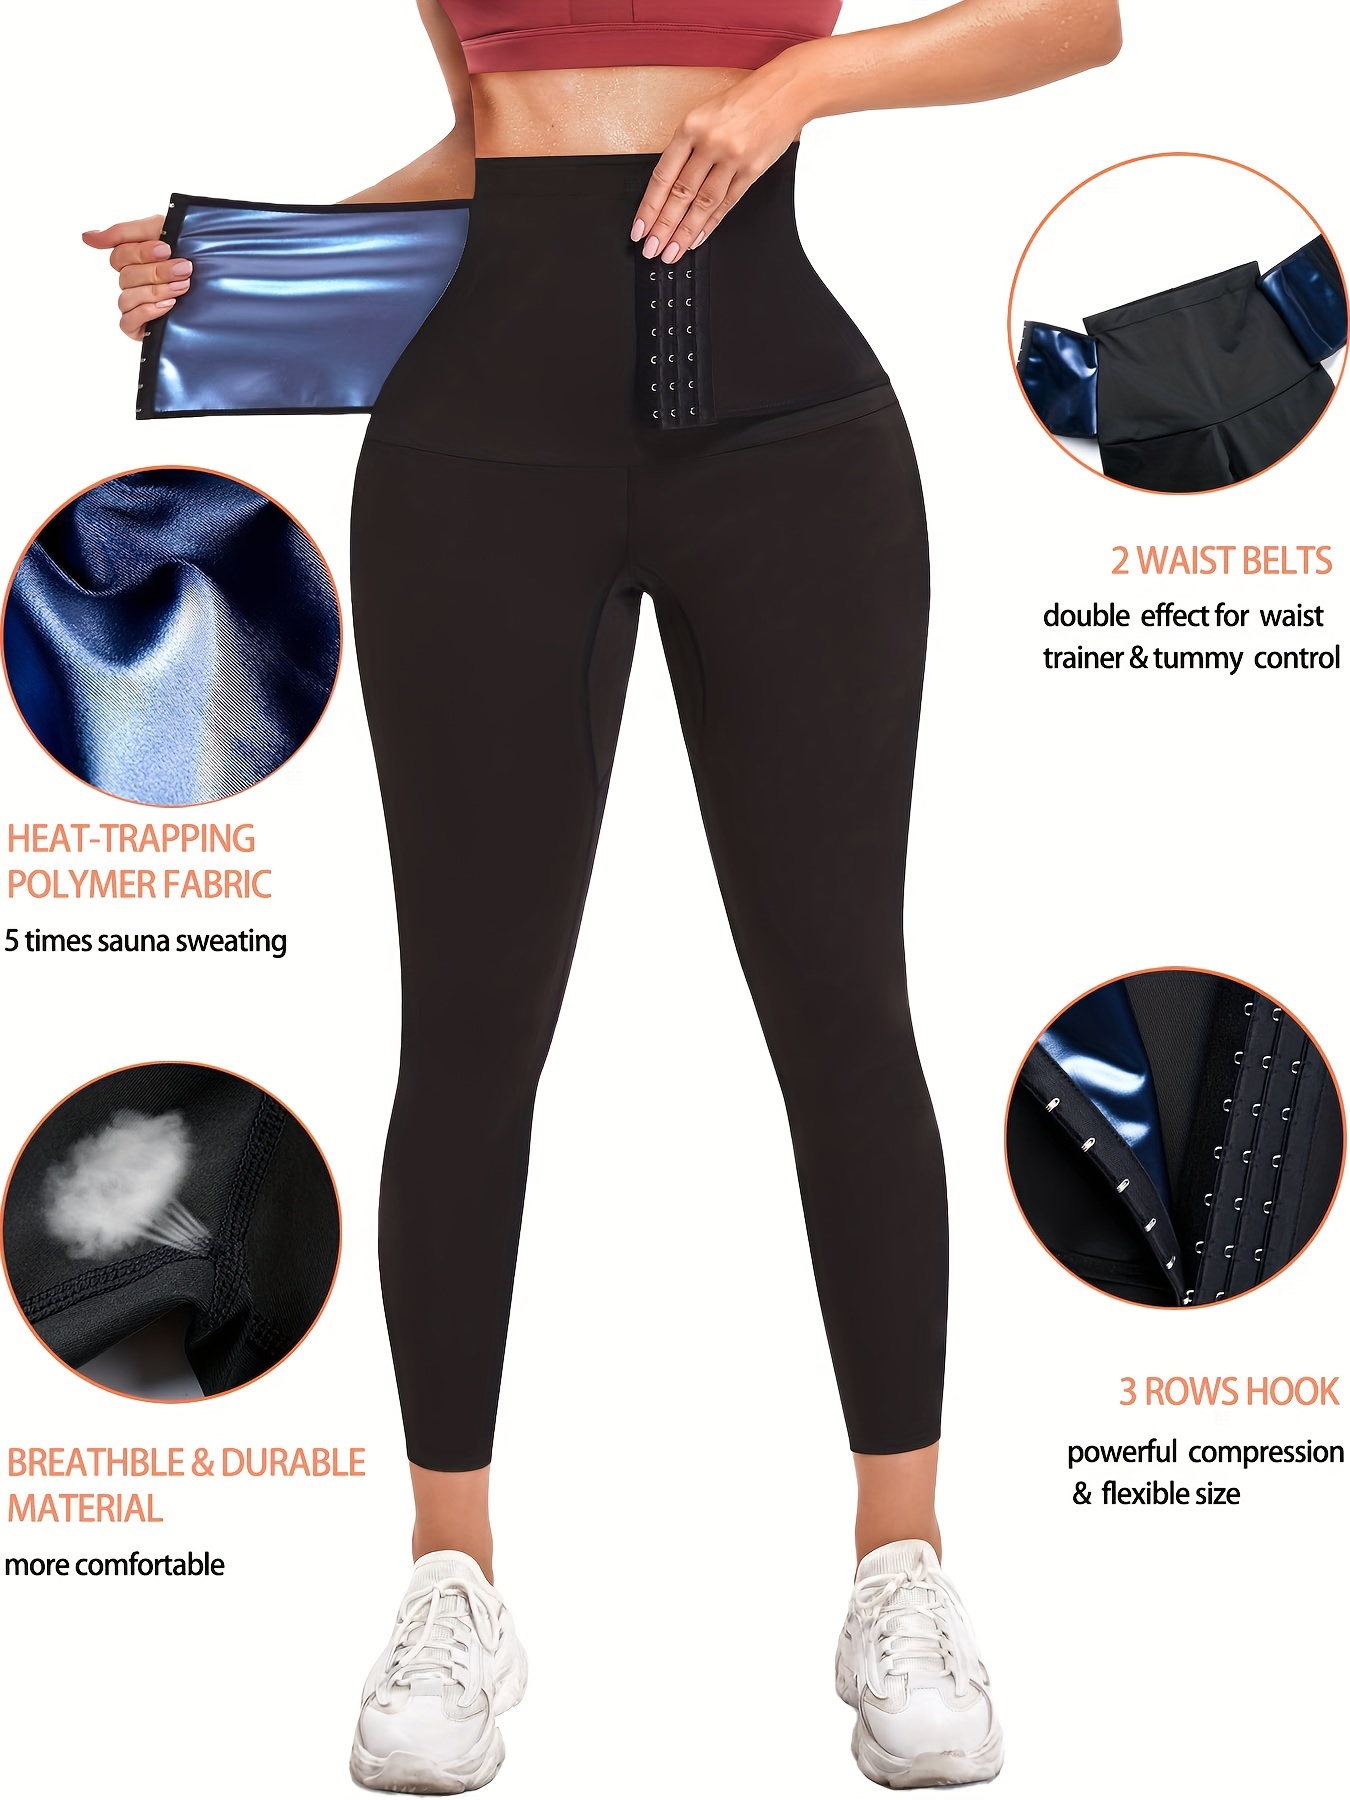  AGILONG Women Sauna Sweat Pants with Pocket High Waist Workout  Capris Leggings Hot Thermo Body Shaper Weight Loss (Black, Small) : Sports  & Outdoors